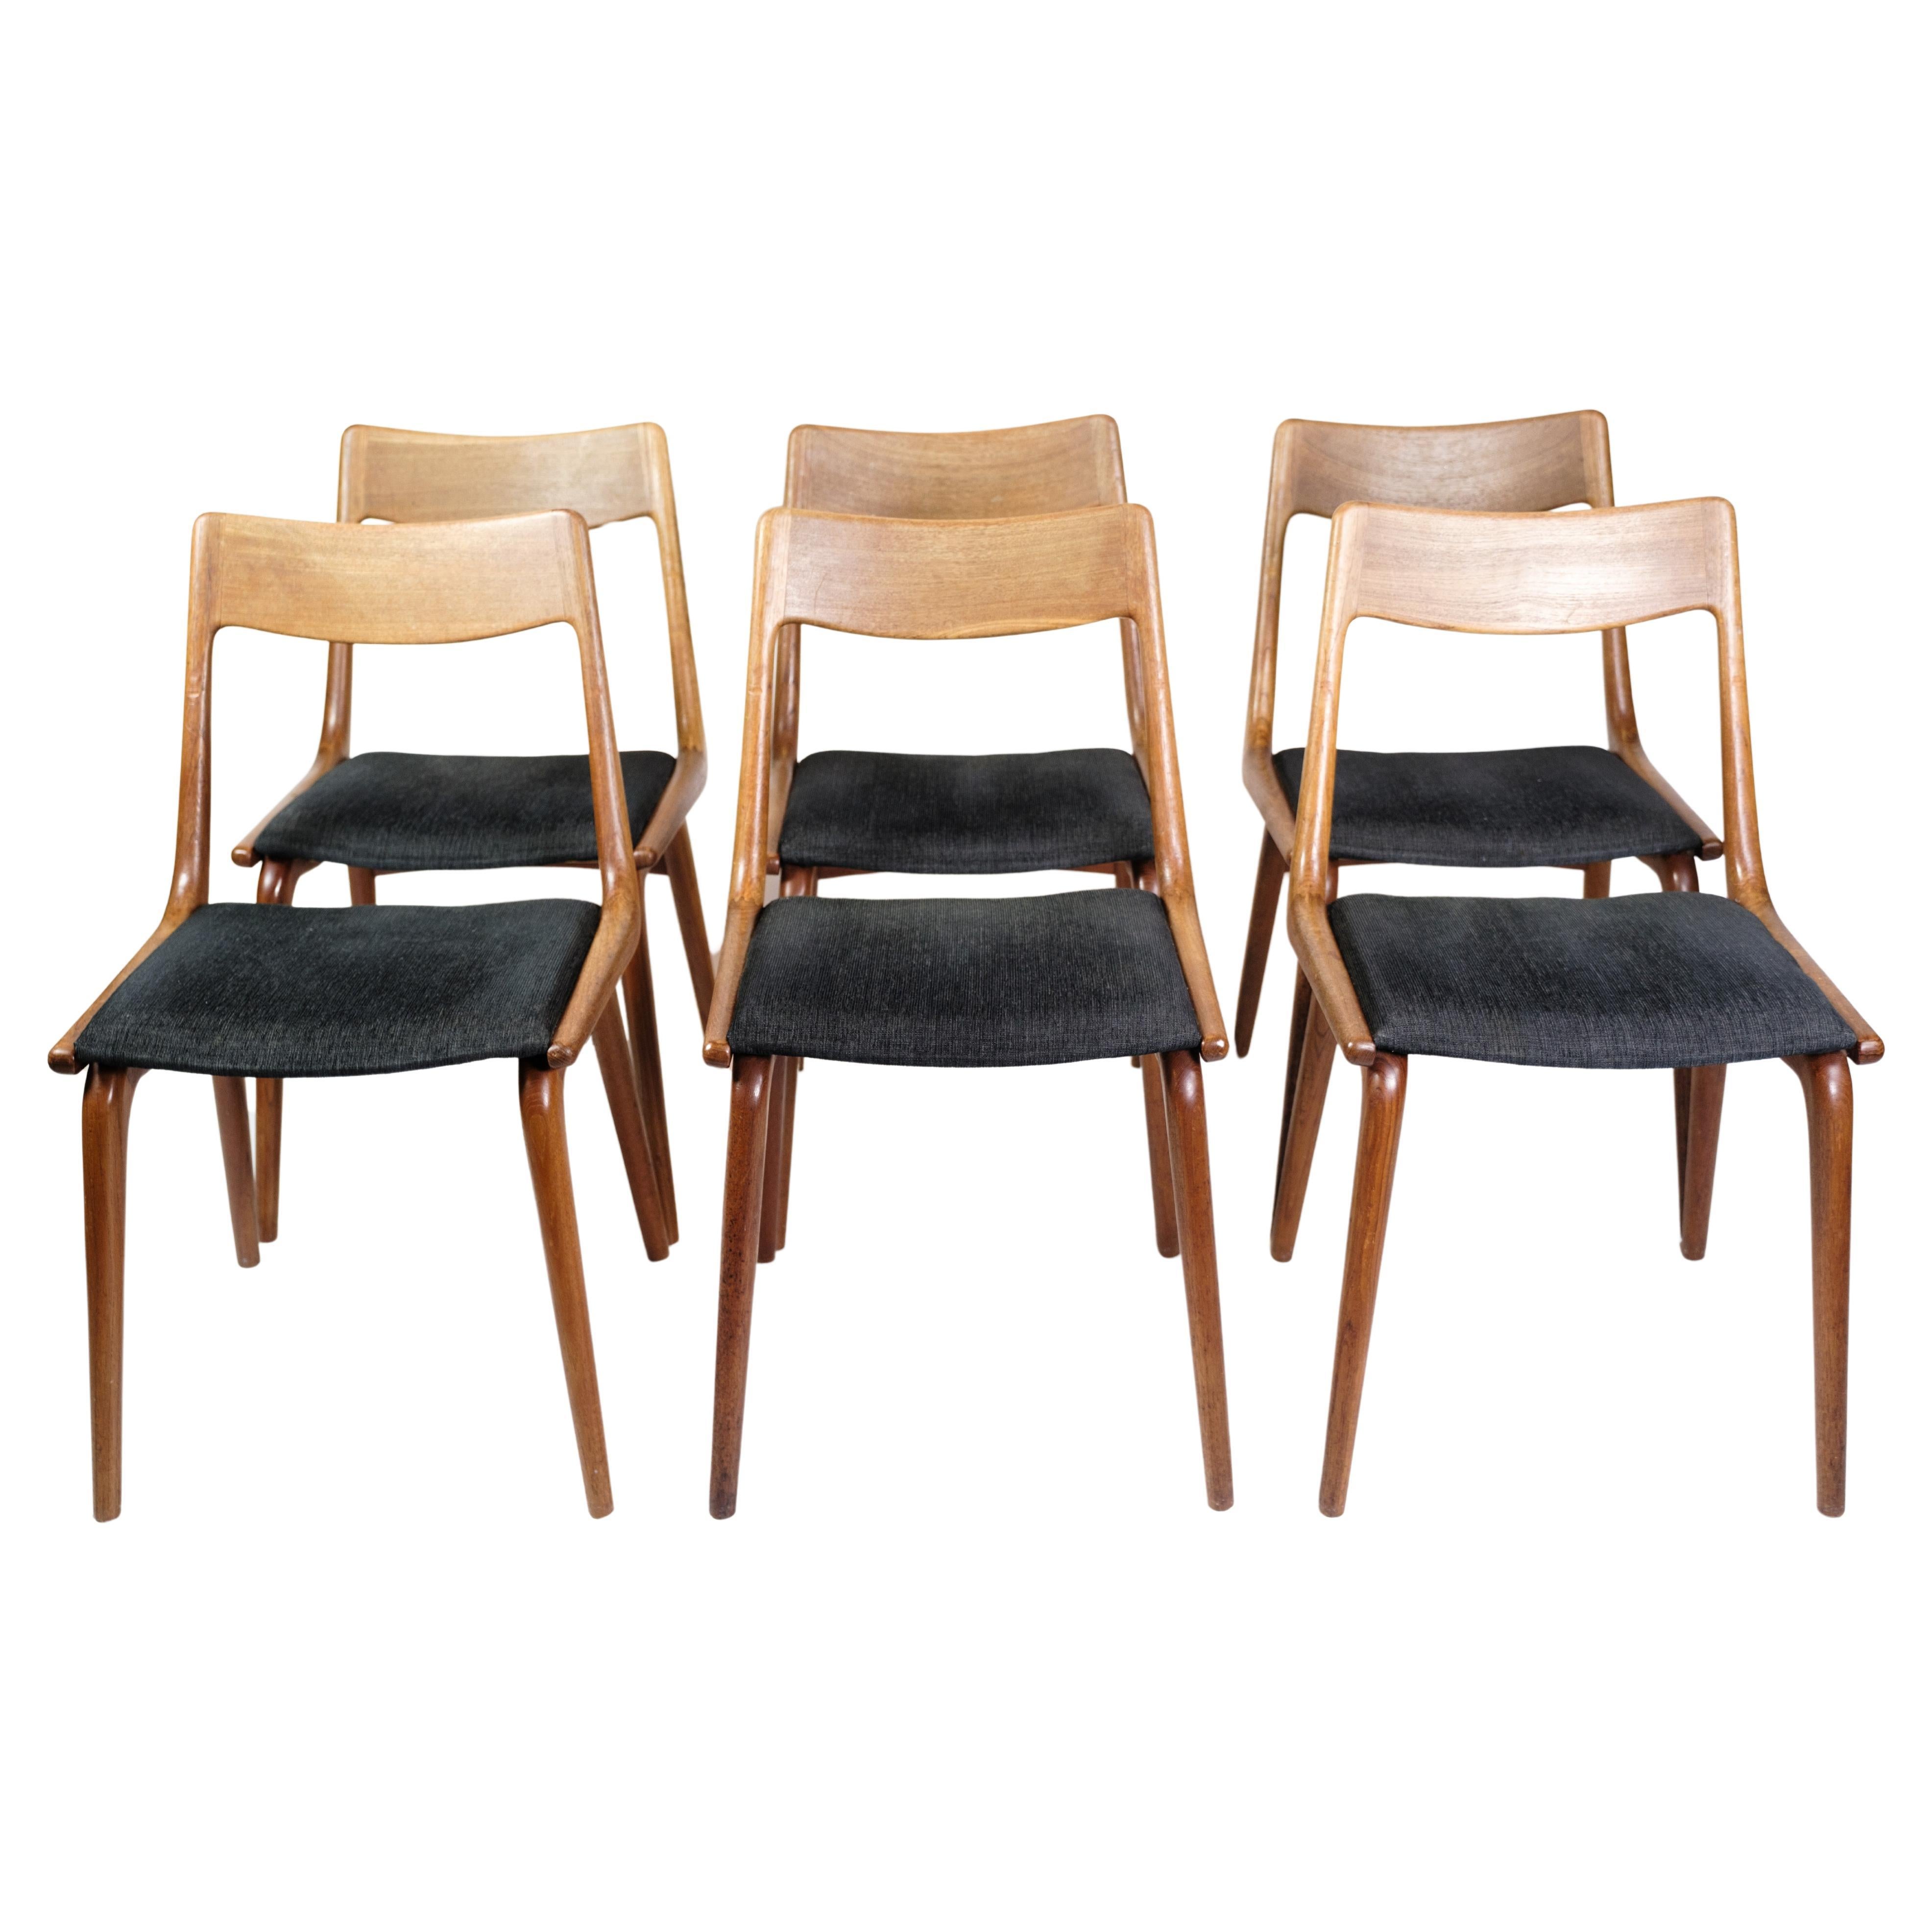 Set Of 6 Dining Room Chairs Model 370 By Alfred Christensen From 1950s For Sale